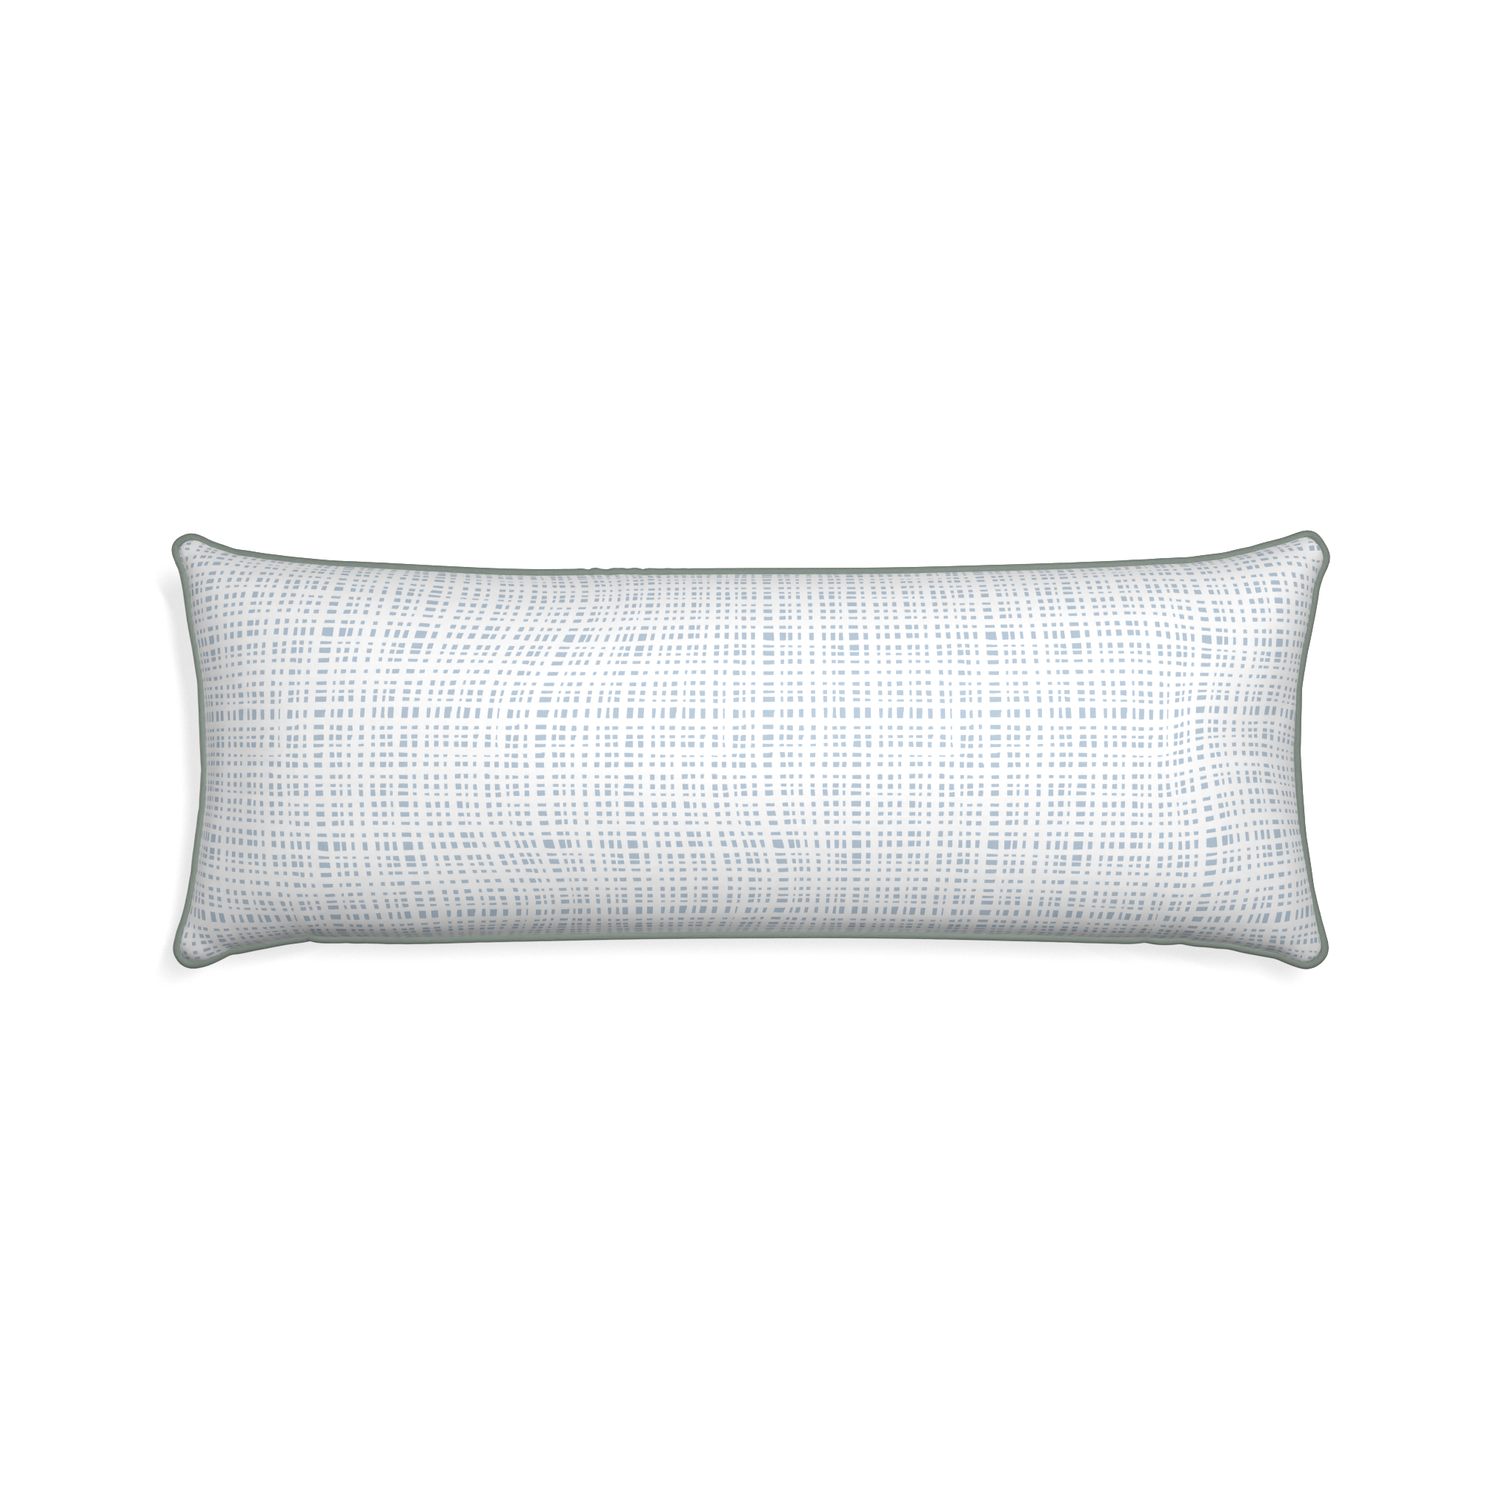 Xl-lumbar ginger sky custom plaid sky bluepillow with sage piping on white background